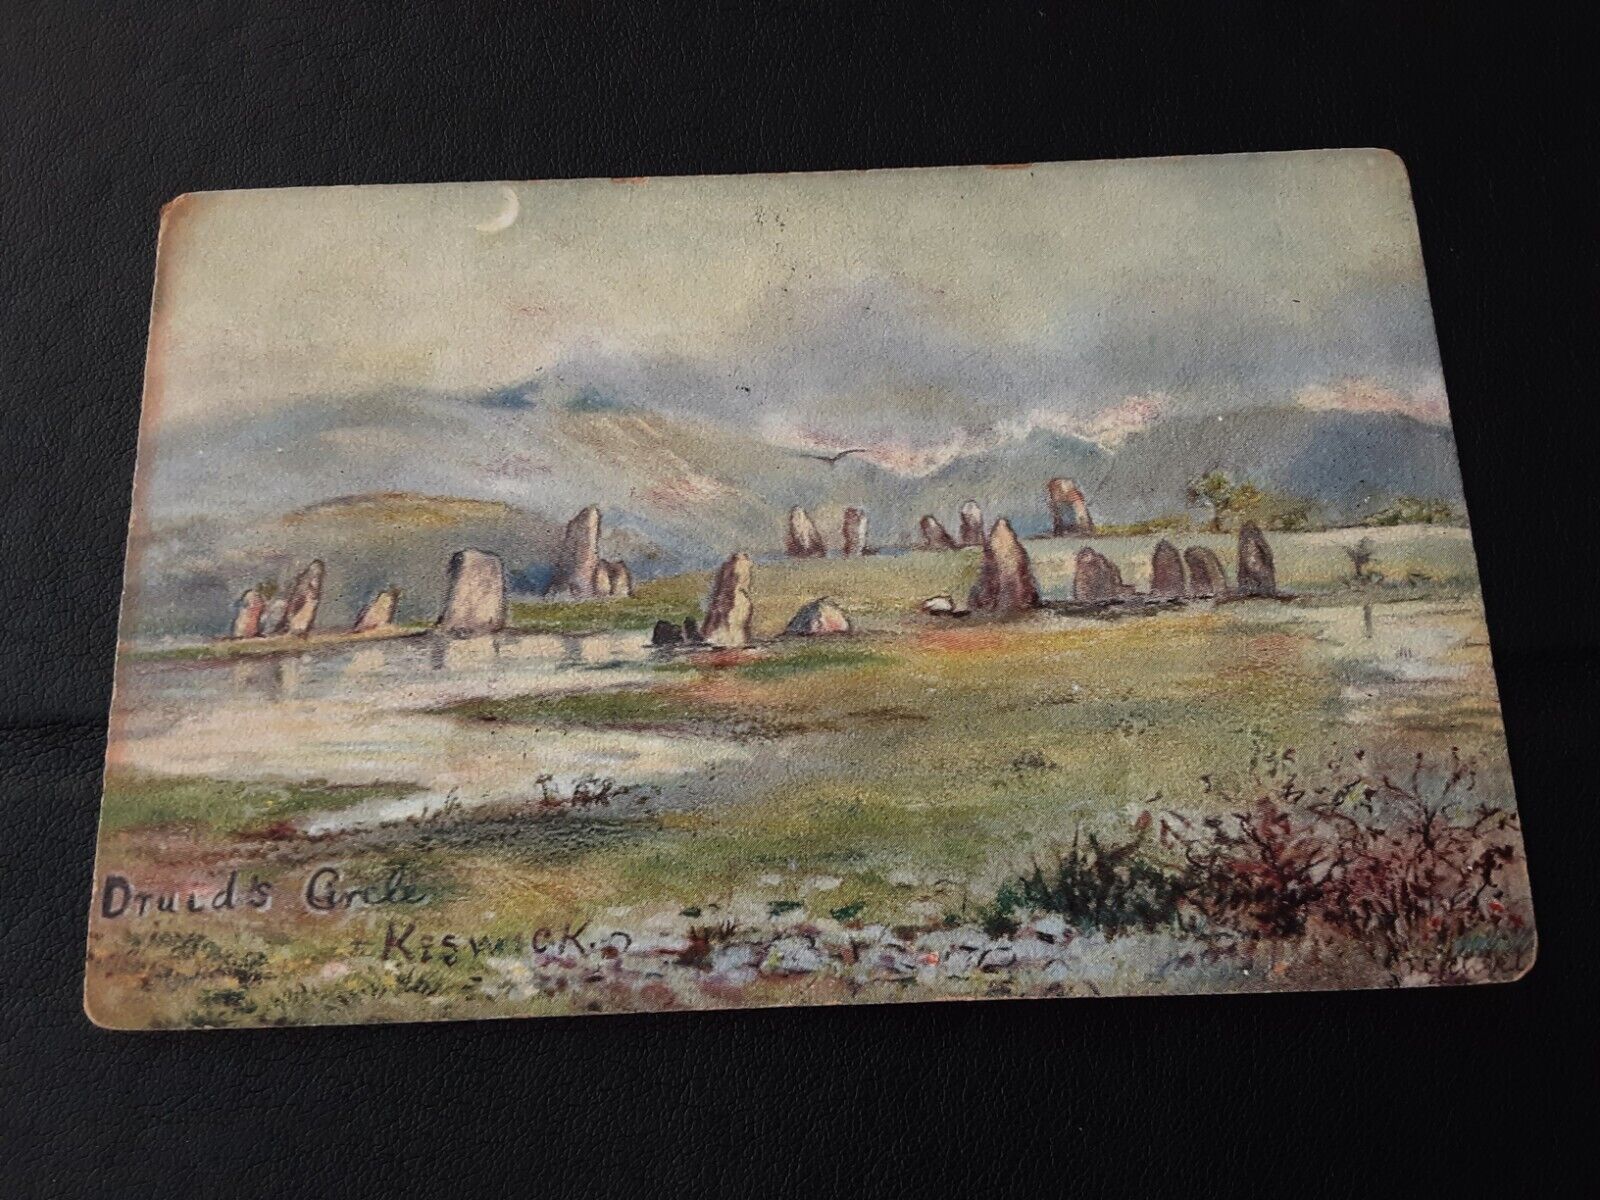 House Clearance - Old Misch & Stock's service of Druid's Circle, Keswick, Cumbria posted 1907